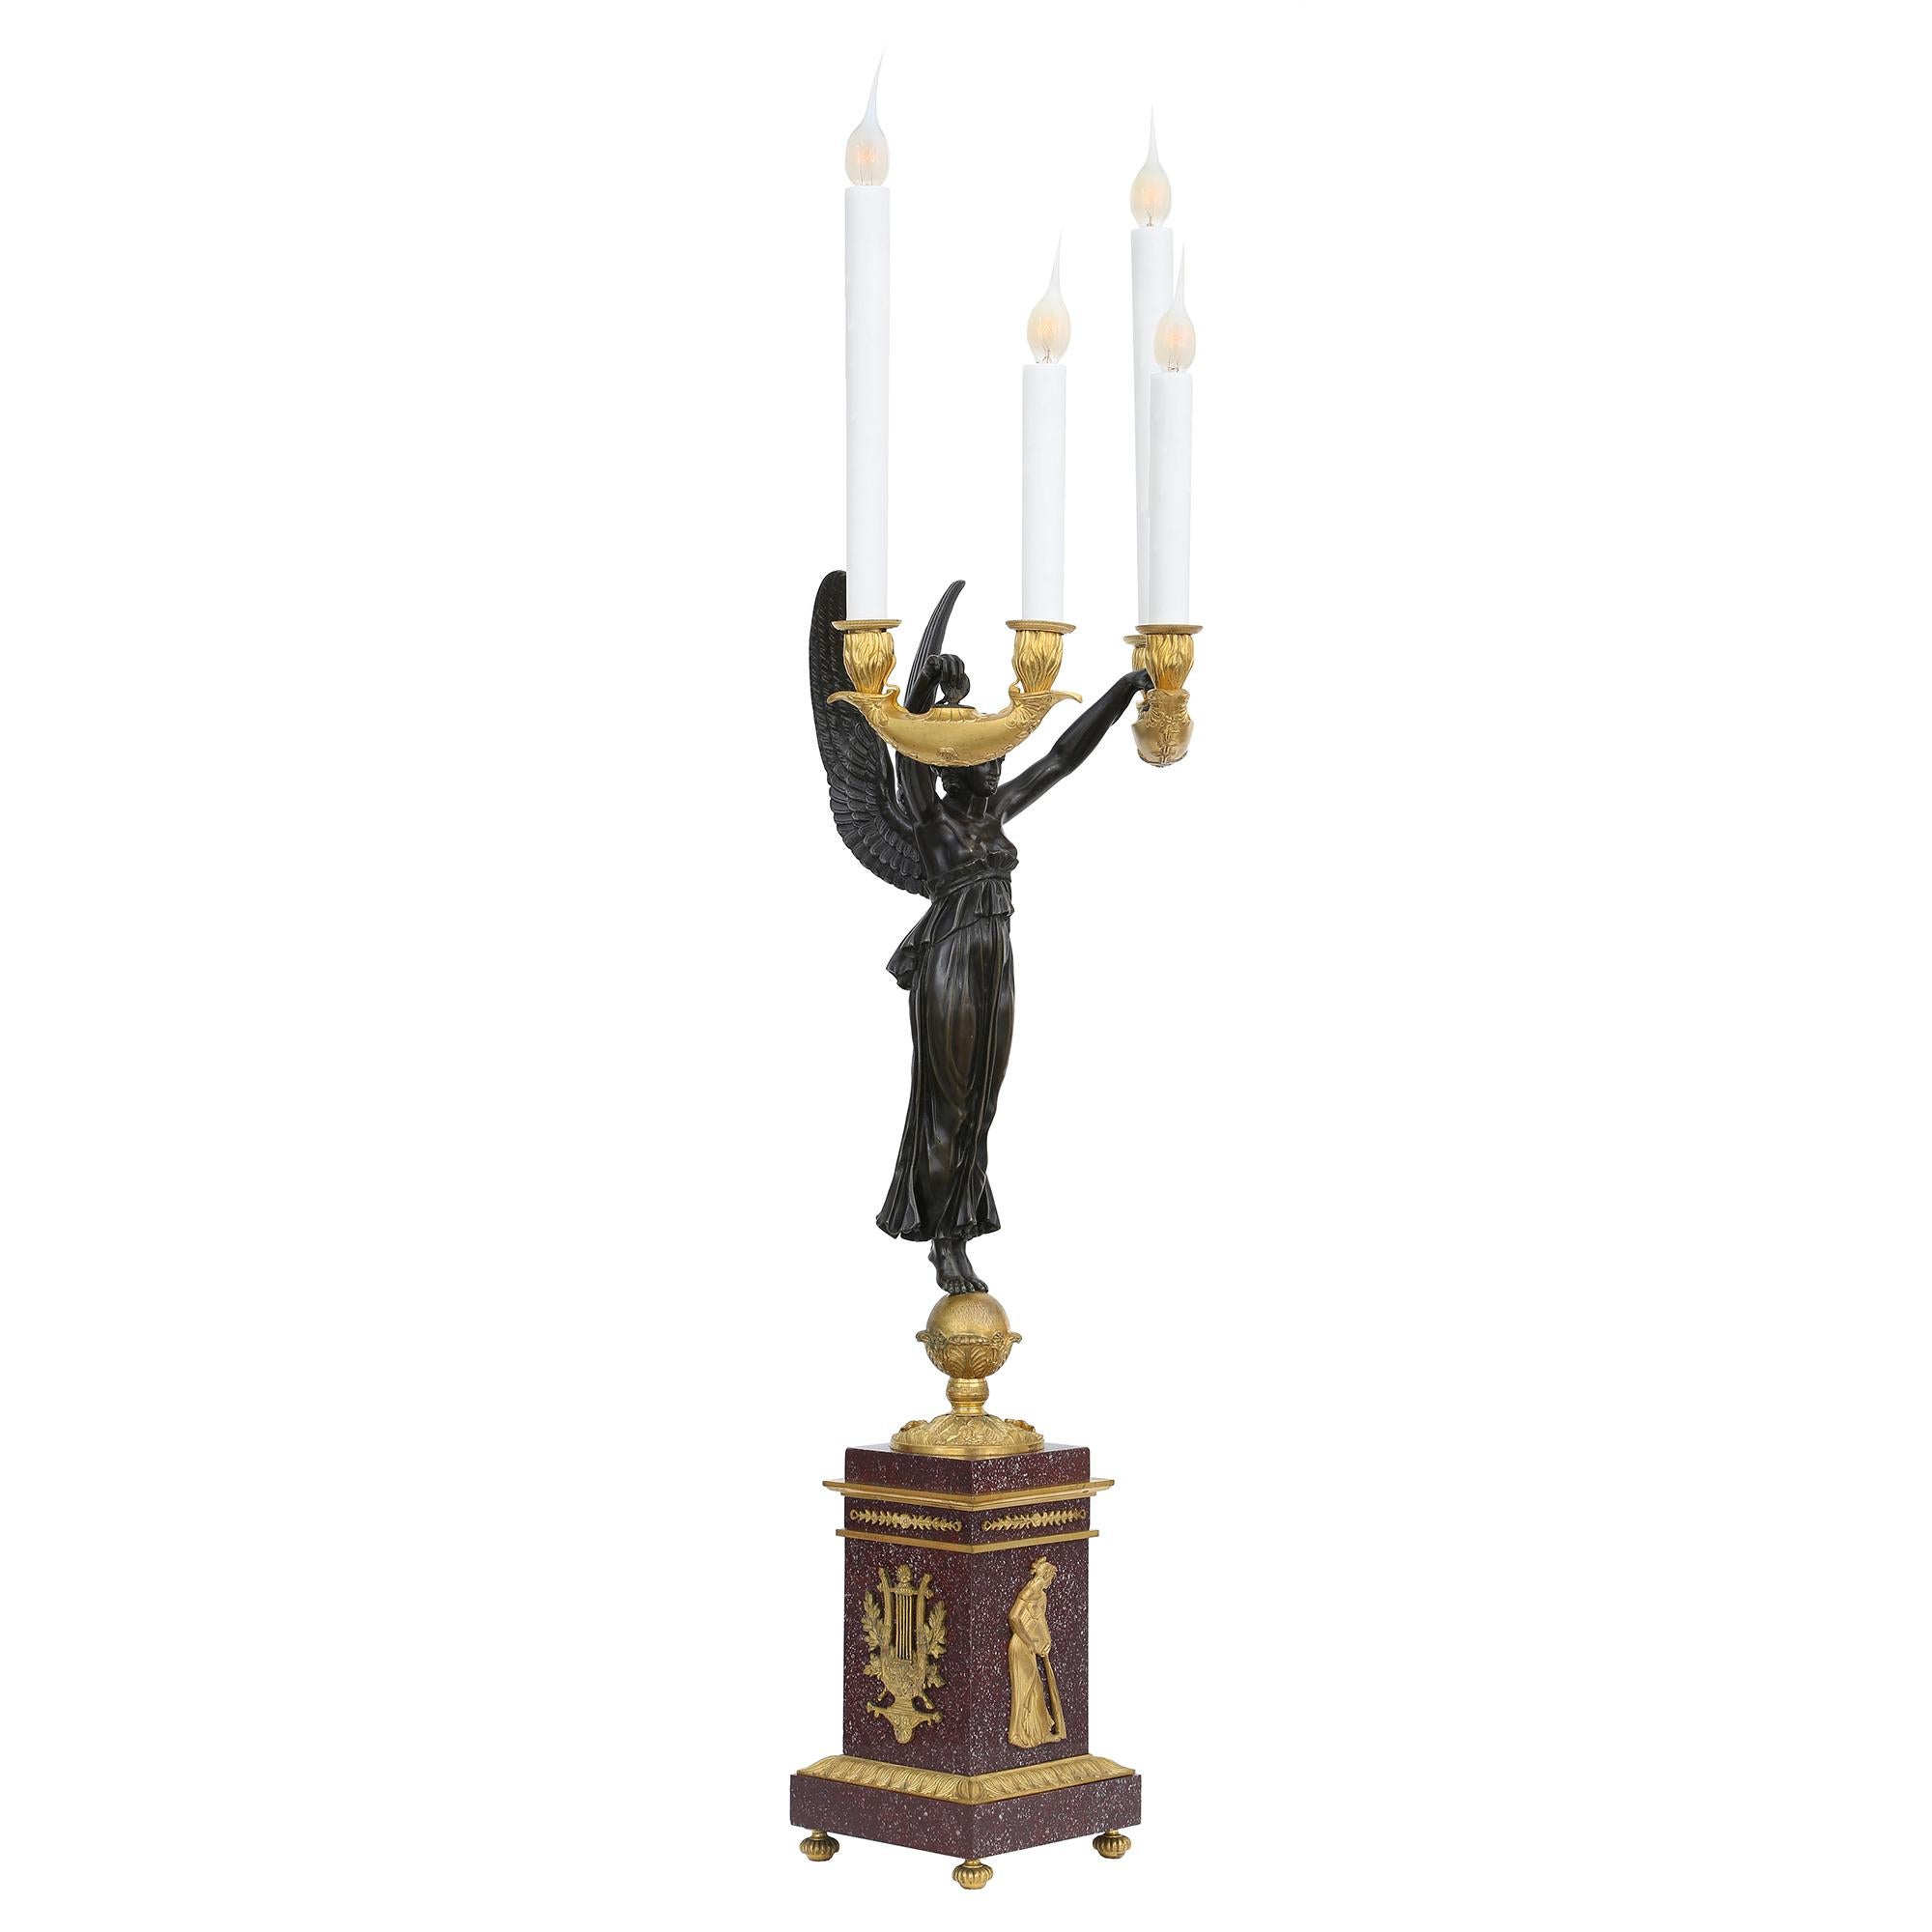 A sensational and extremely high quality true pair of French 19th century neo-slassical st. ormolu, patinated bronze and Porphyry electrified candelabras Aux Victoires. Each candelabra is raised by four reeded topie shaped feet below the Porphyry